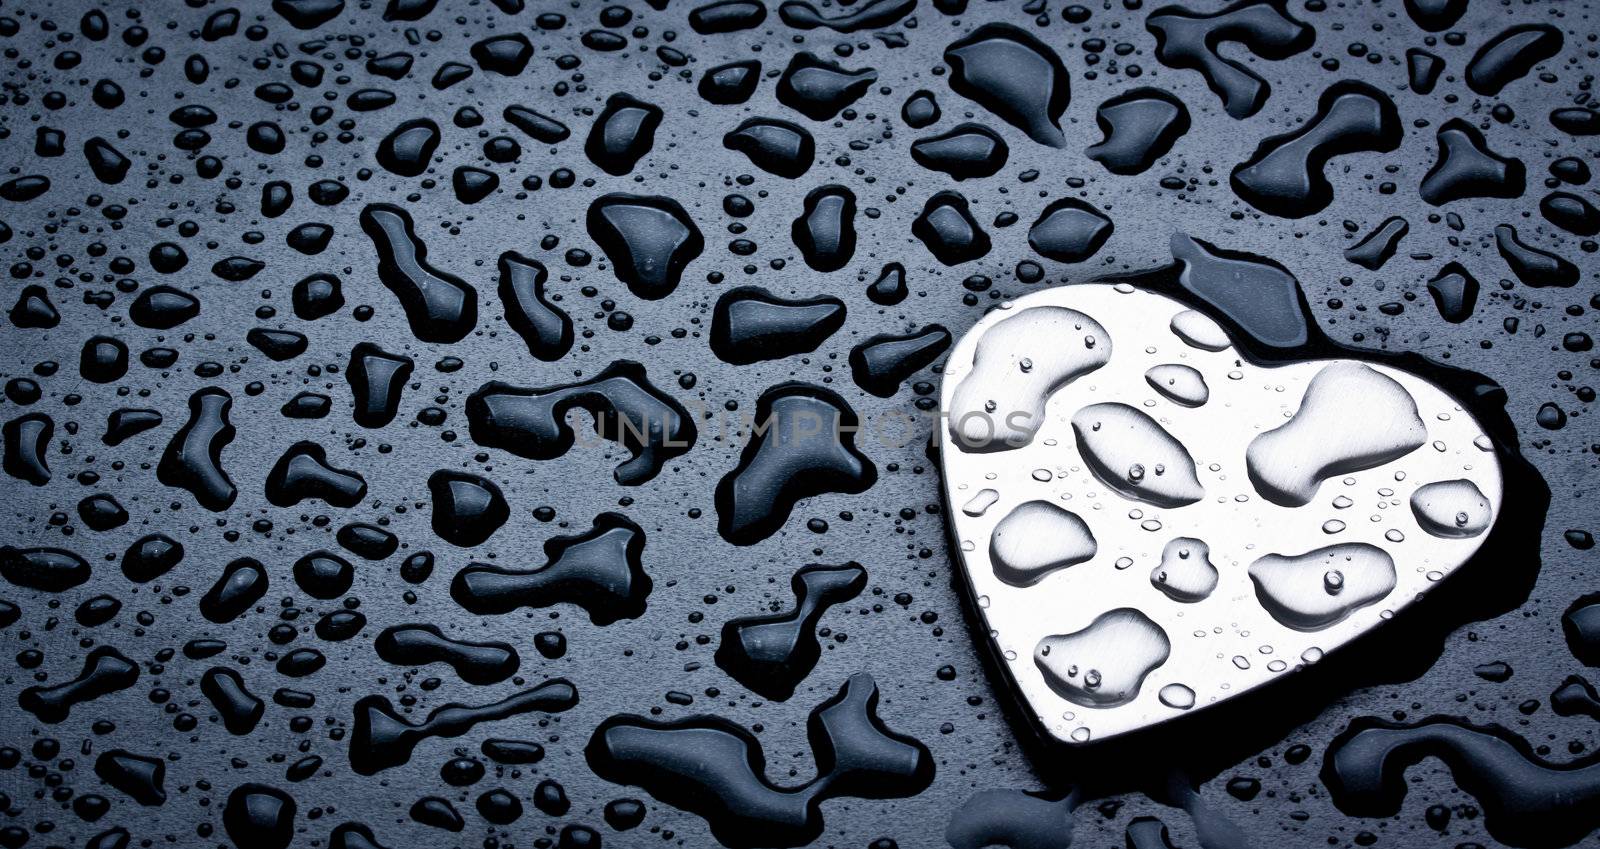 metal heart on a black wet background